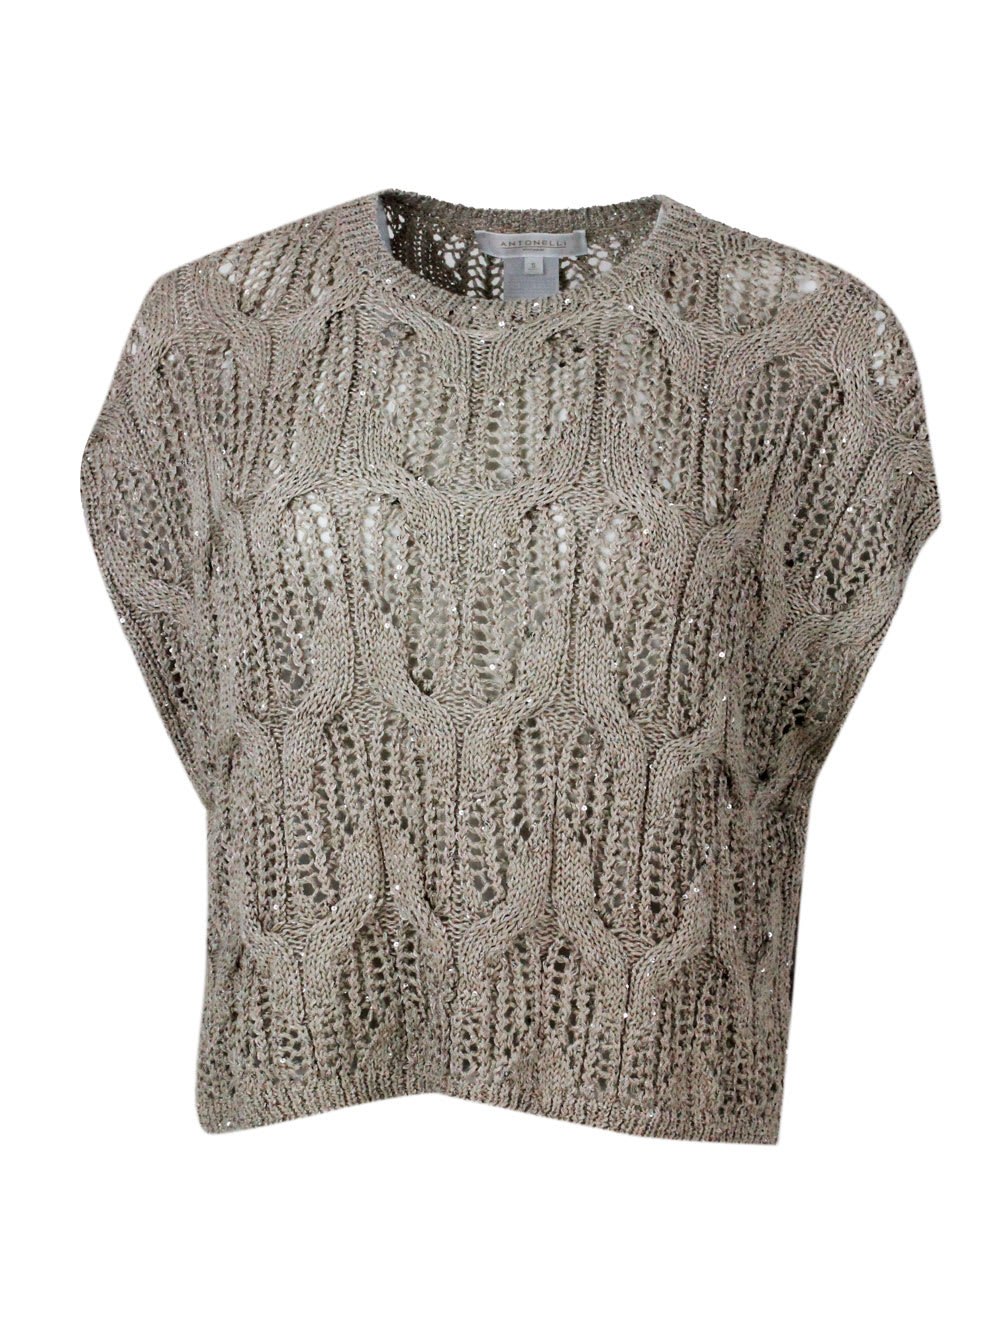 Sleeveless Crew-neck Sweater With Cable Knit Embellished With Cotton And Linen Microsequins